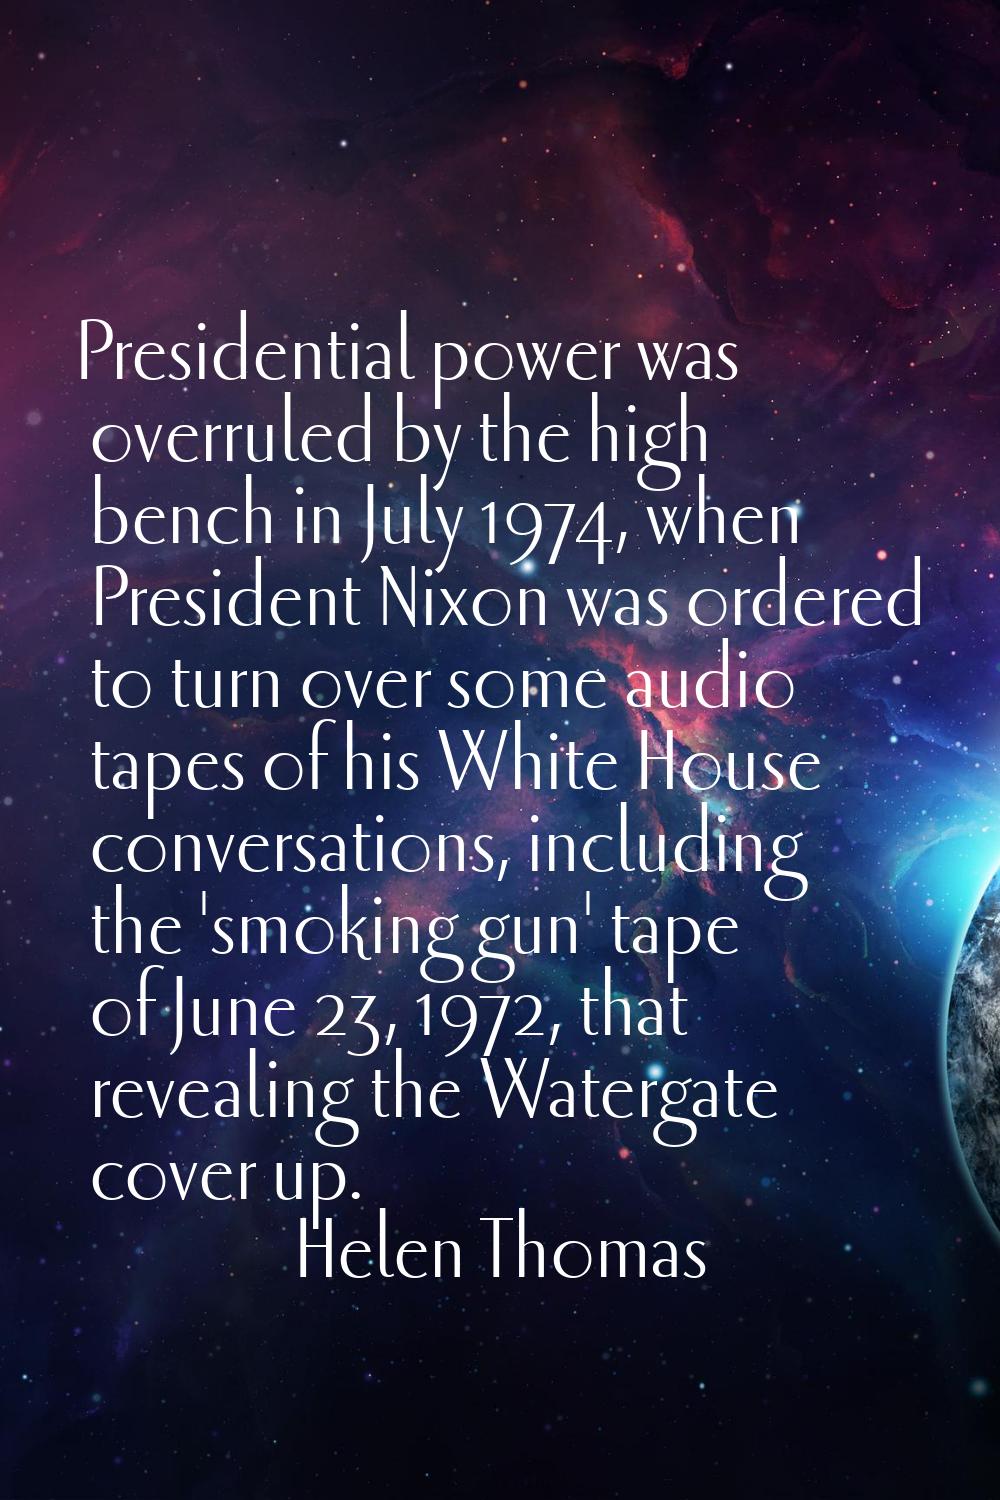 Presidential power was overruled by the high bench in July 1974, when President Nixon was ordered t